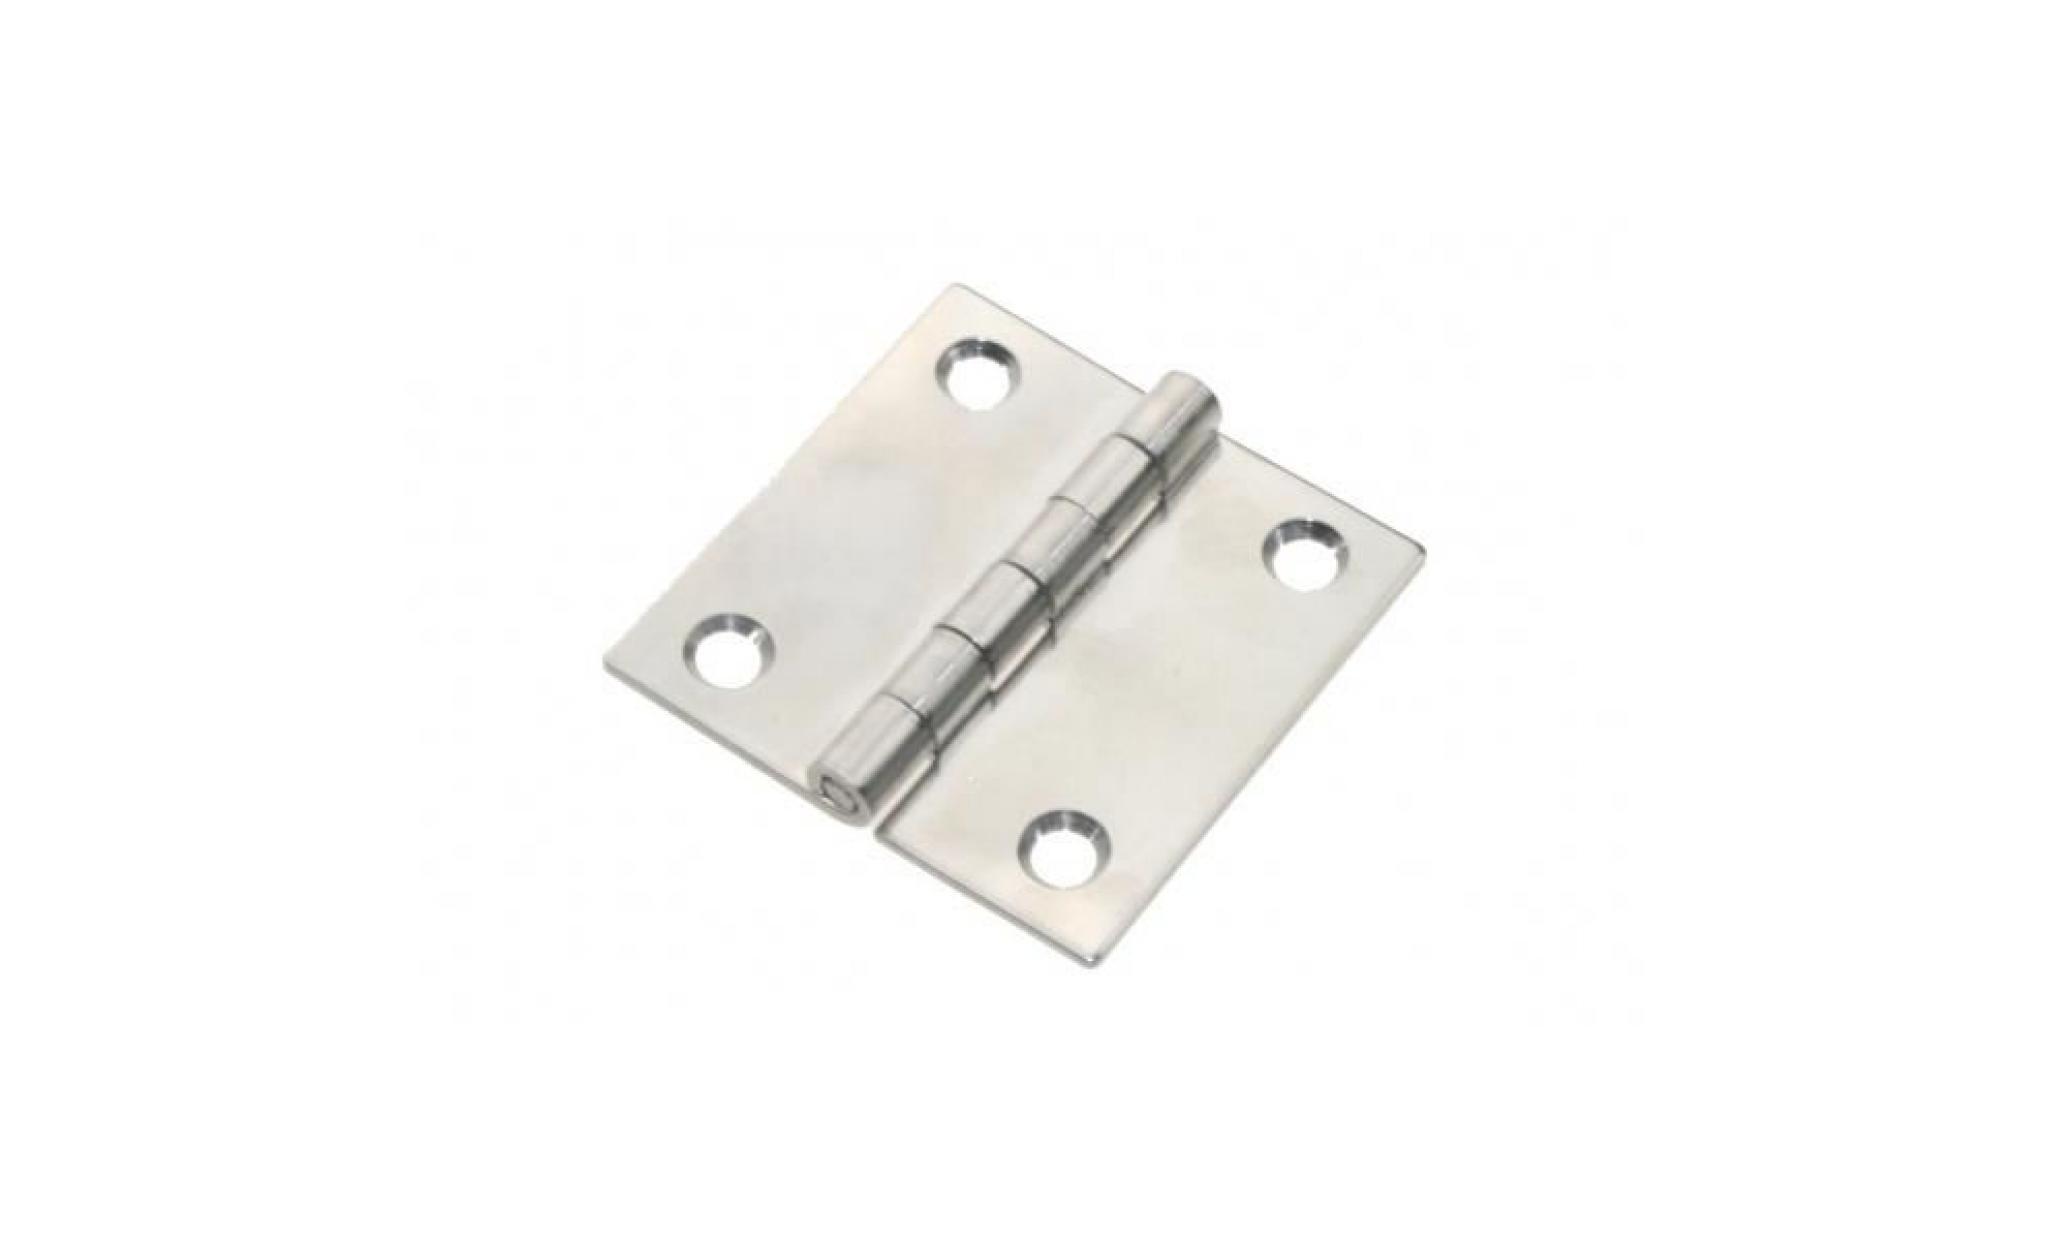 hinge stainless steel a2 50mmx50mm arbo inox348